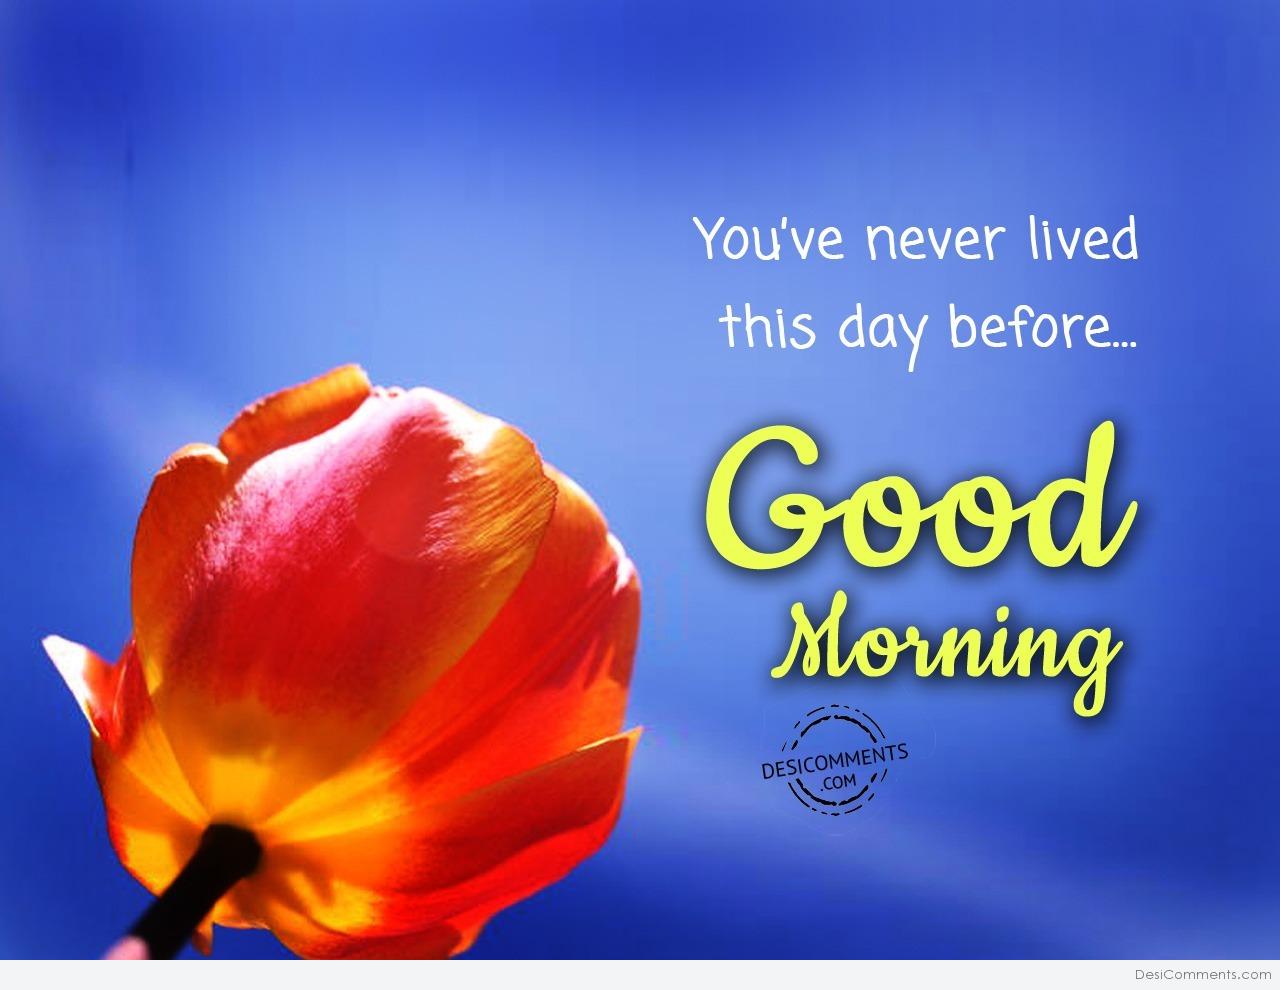 You’ve Never Lived This Day Before – Good Morning - DesiComments.com